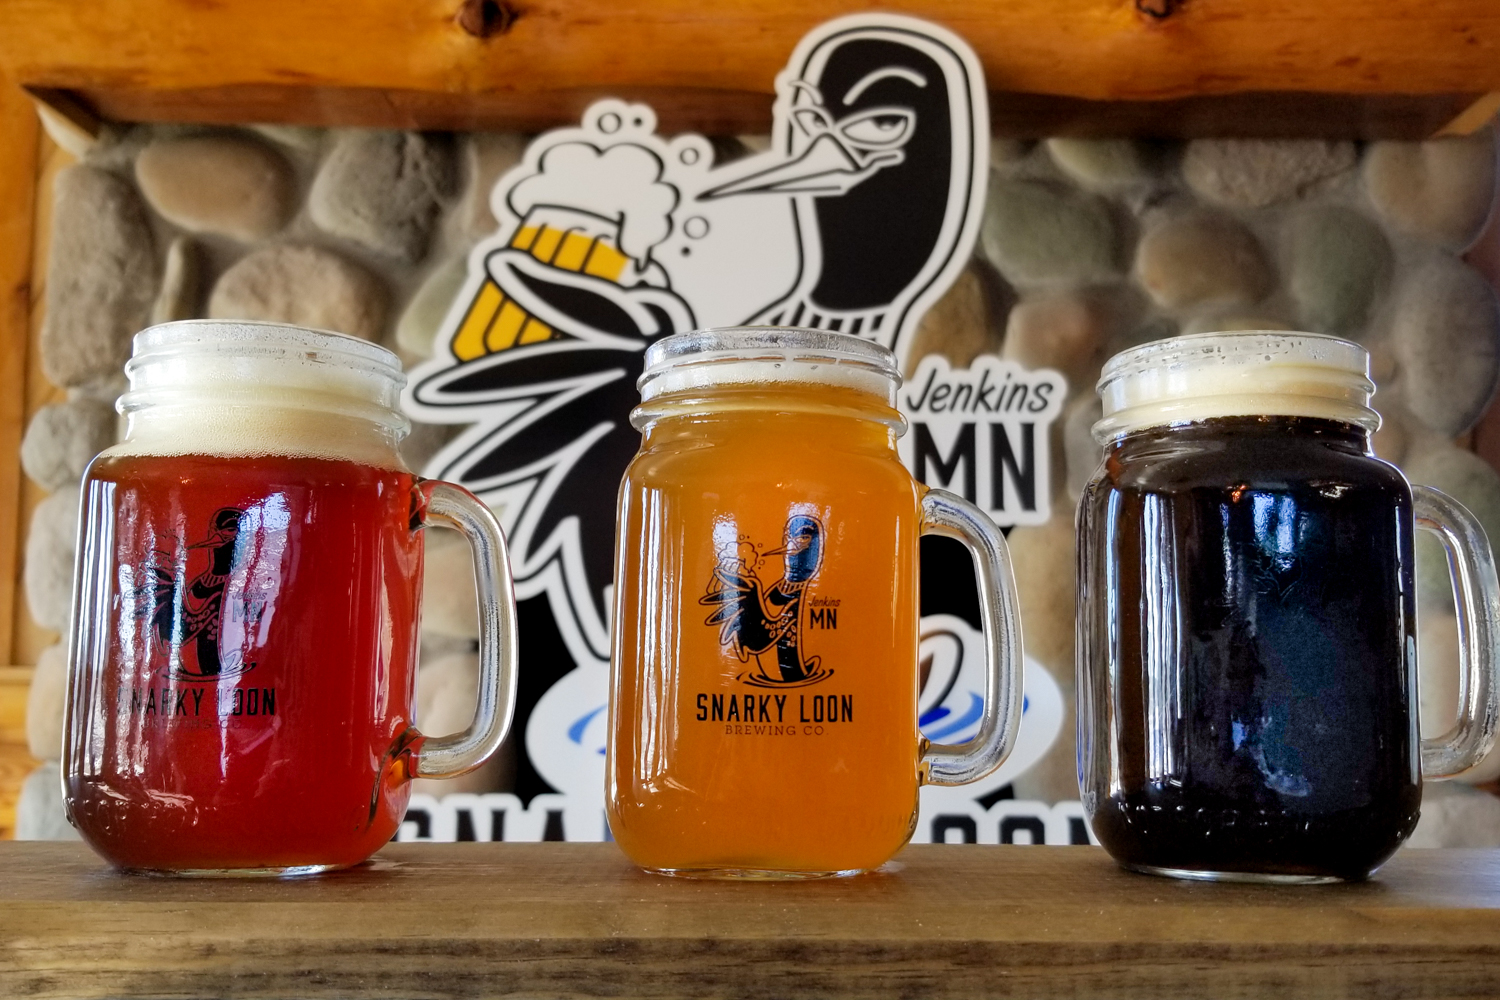 Snarky Loon Brewing is set to open in Jenkins, Minnesota, on March 11, 2021 • Photo via Snarky Loon Brewing Company